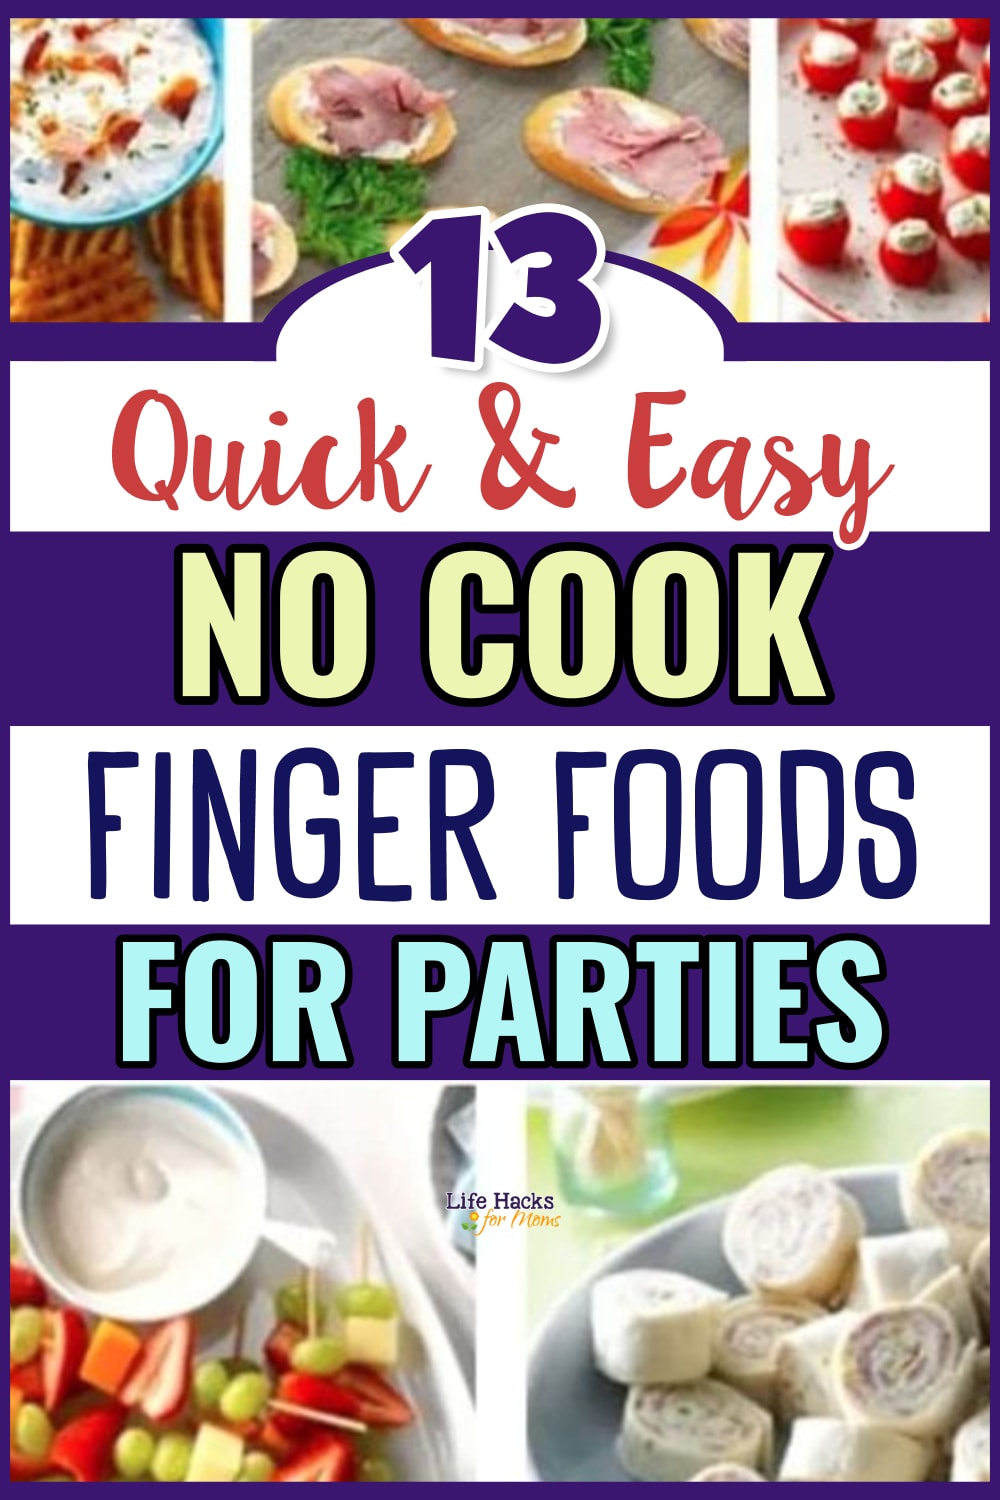 no cook finger foods for parties for when you need INEXPENSIVE snacks for large groups or a potluck crowd